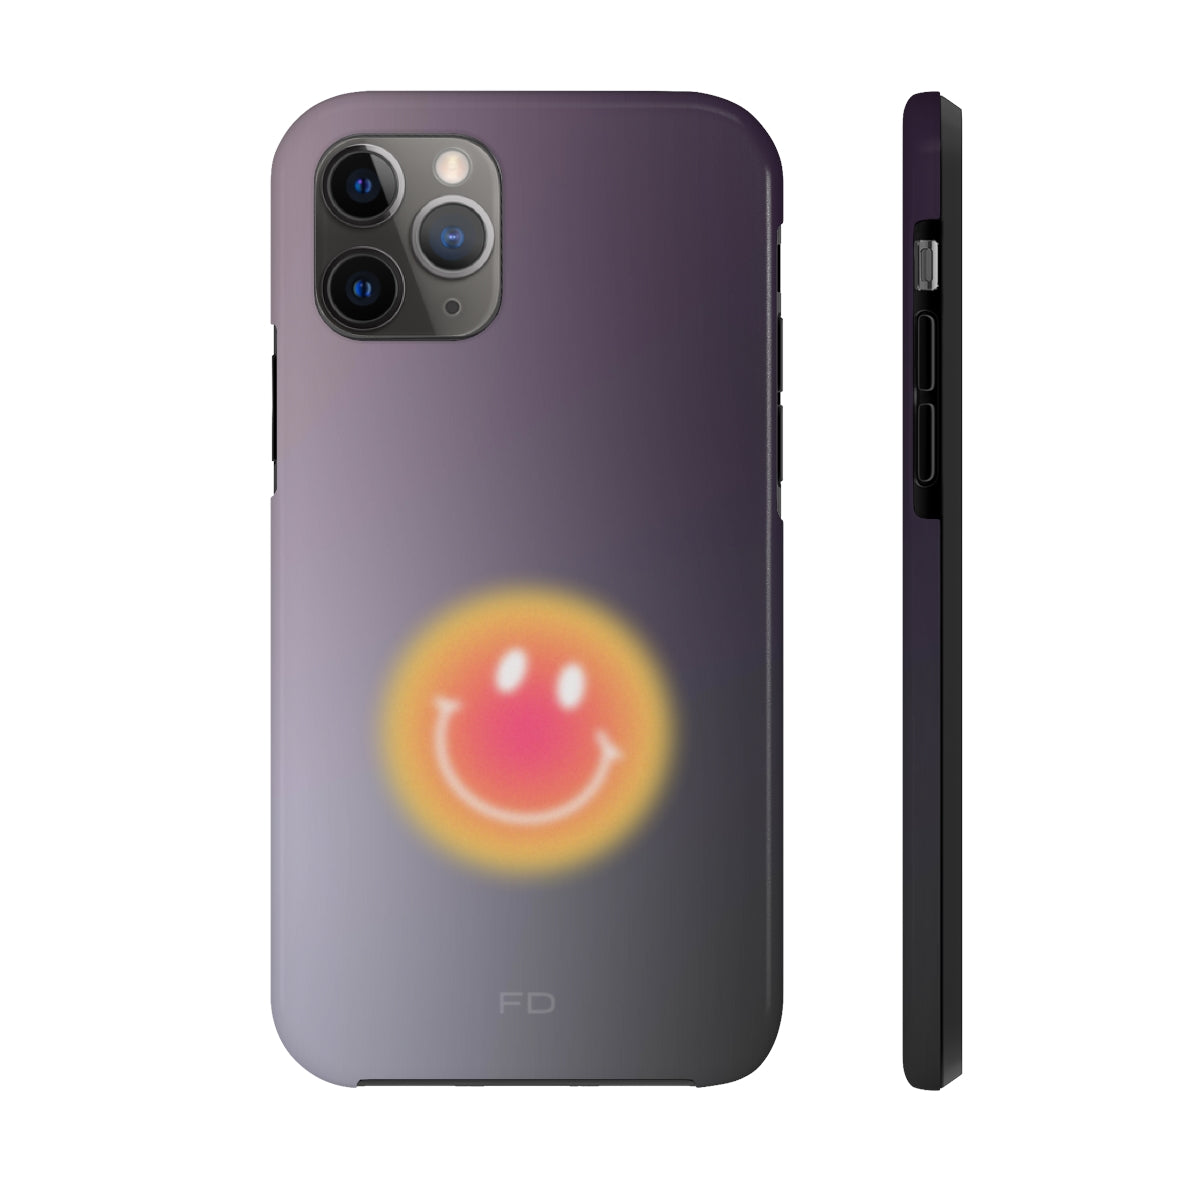 Smiley Face Touch Case for iPhone with Wireless Charging